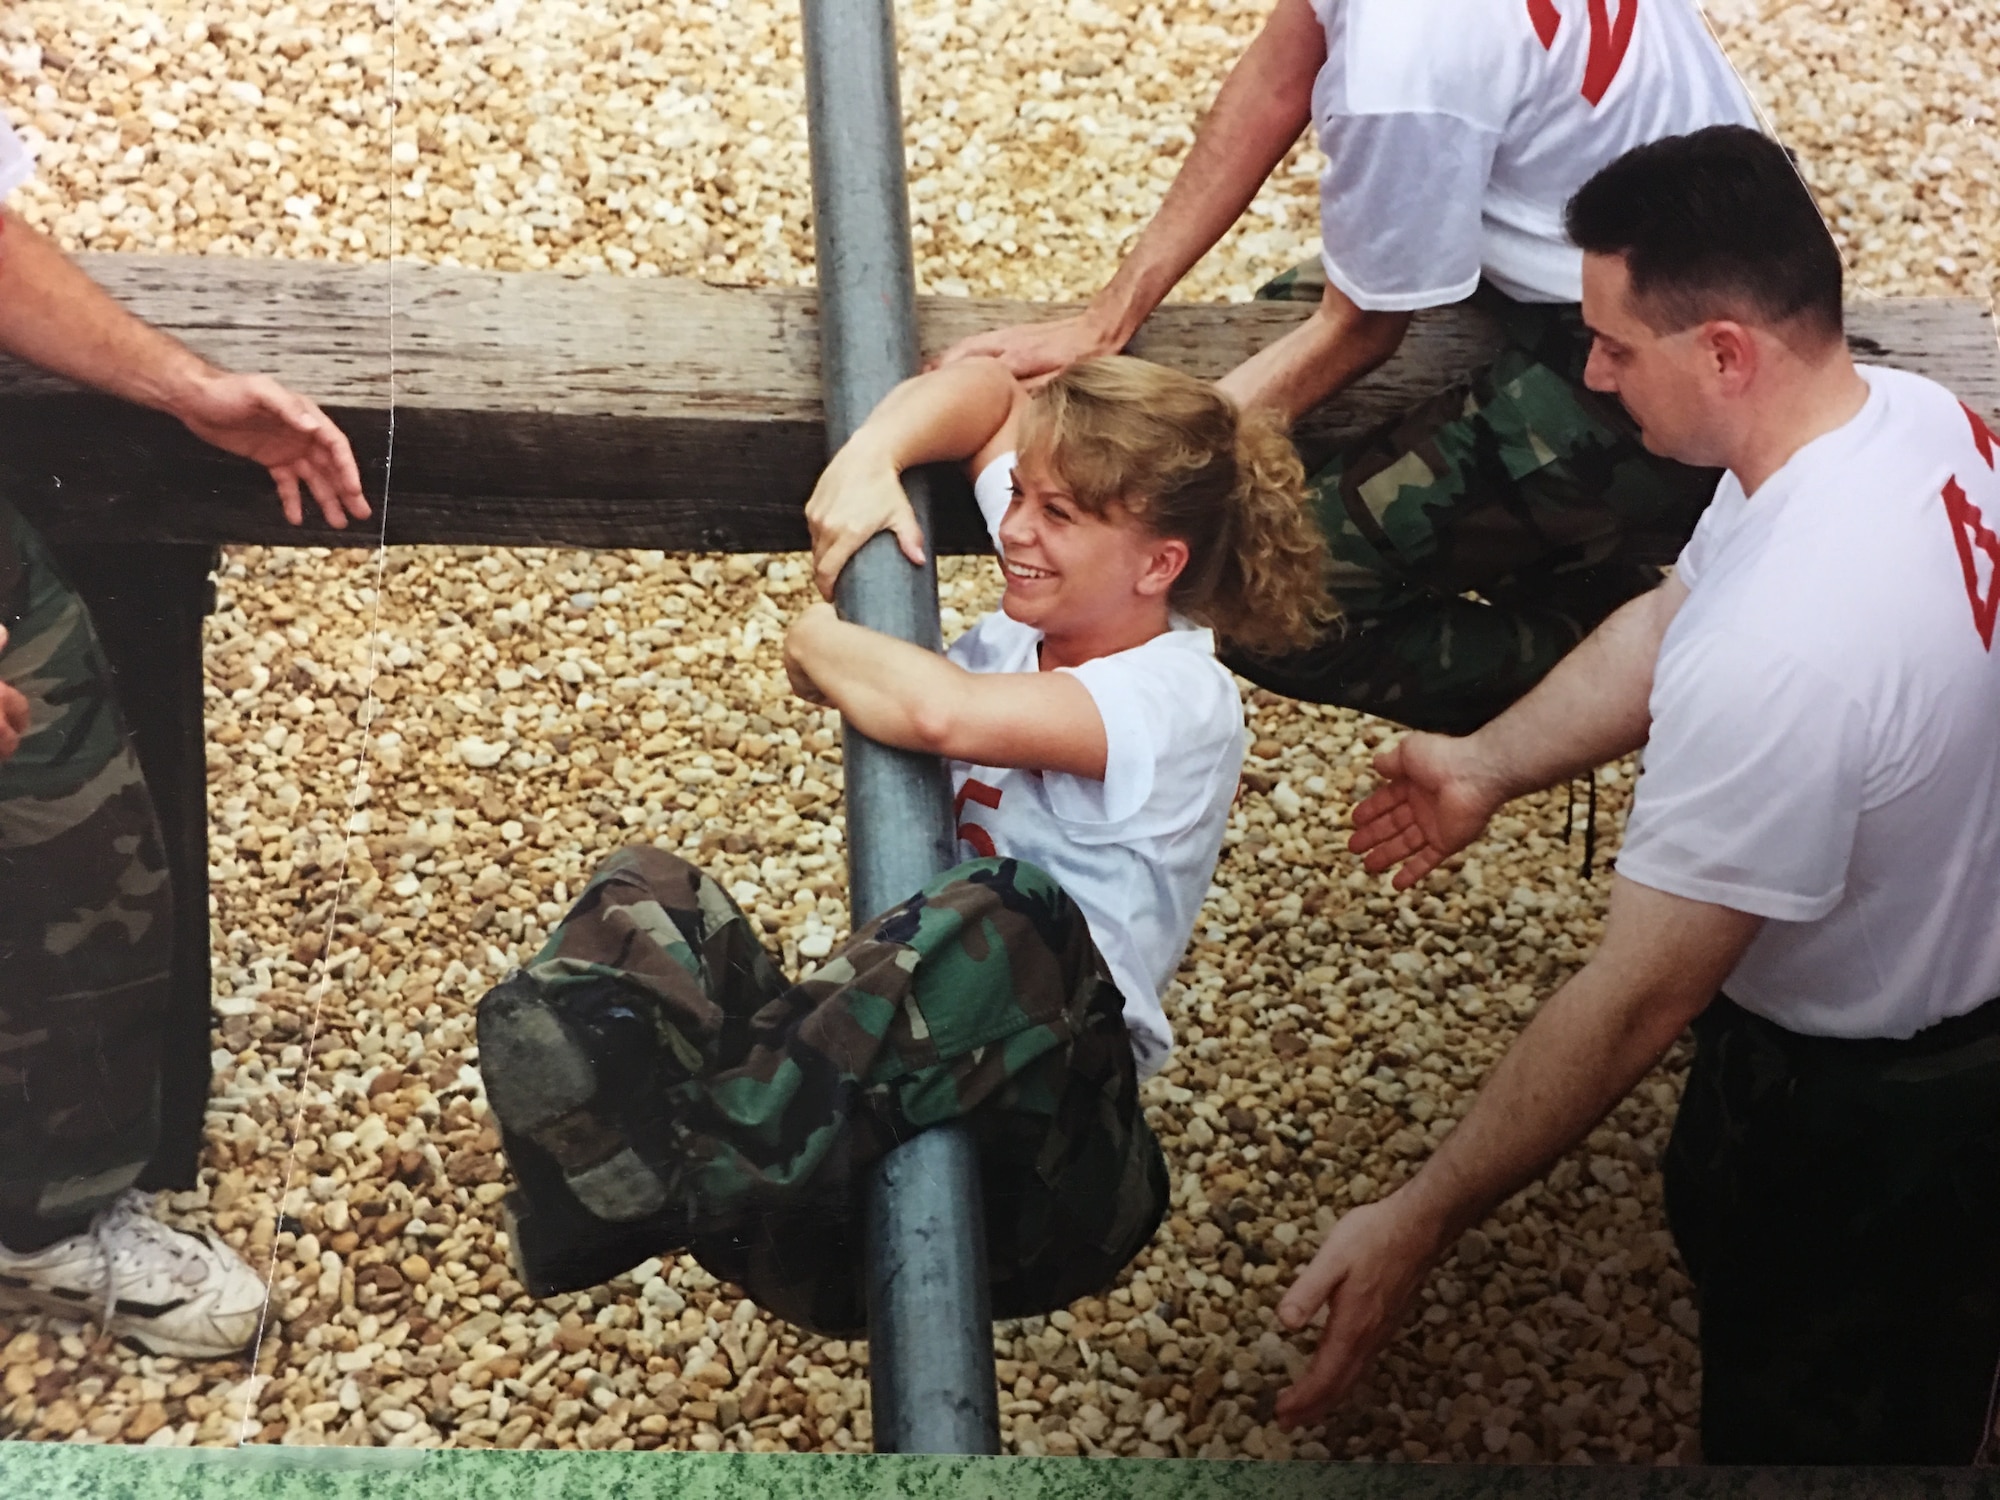 Tammy Jetton on the pole during Squadron Officers School, trying to be a team player, 1999.